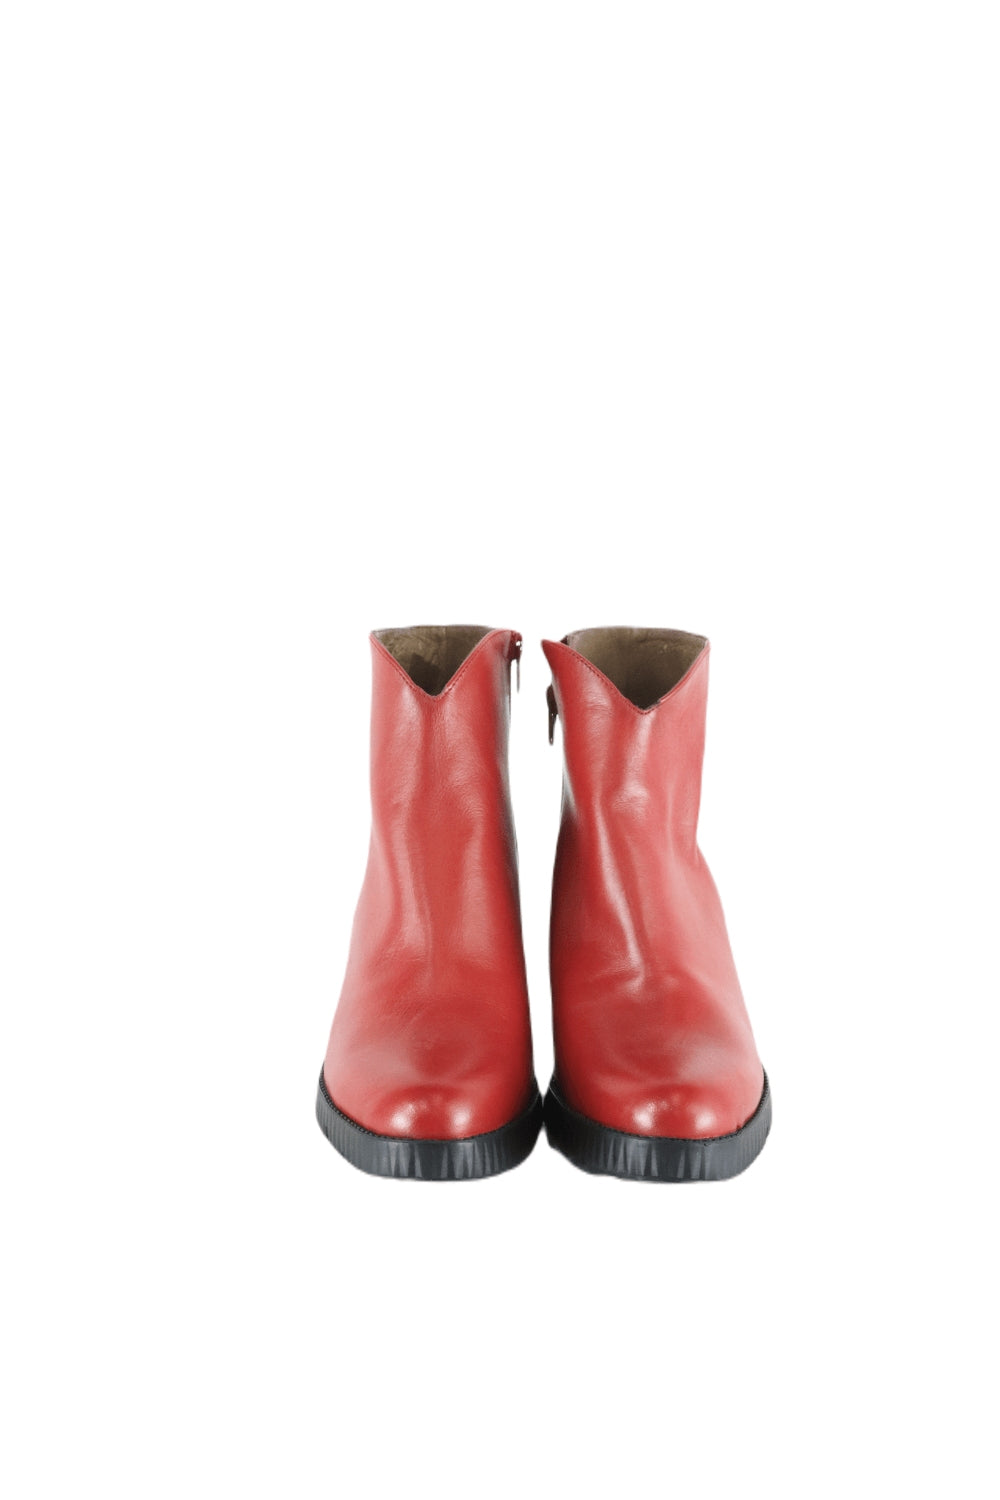 Wonders Red Boots 38